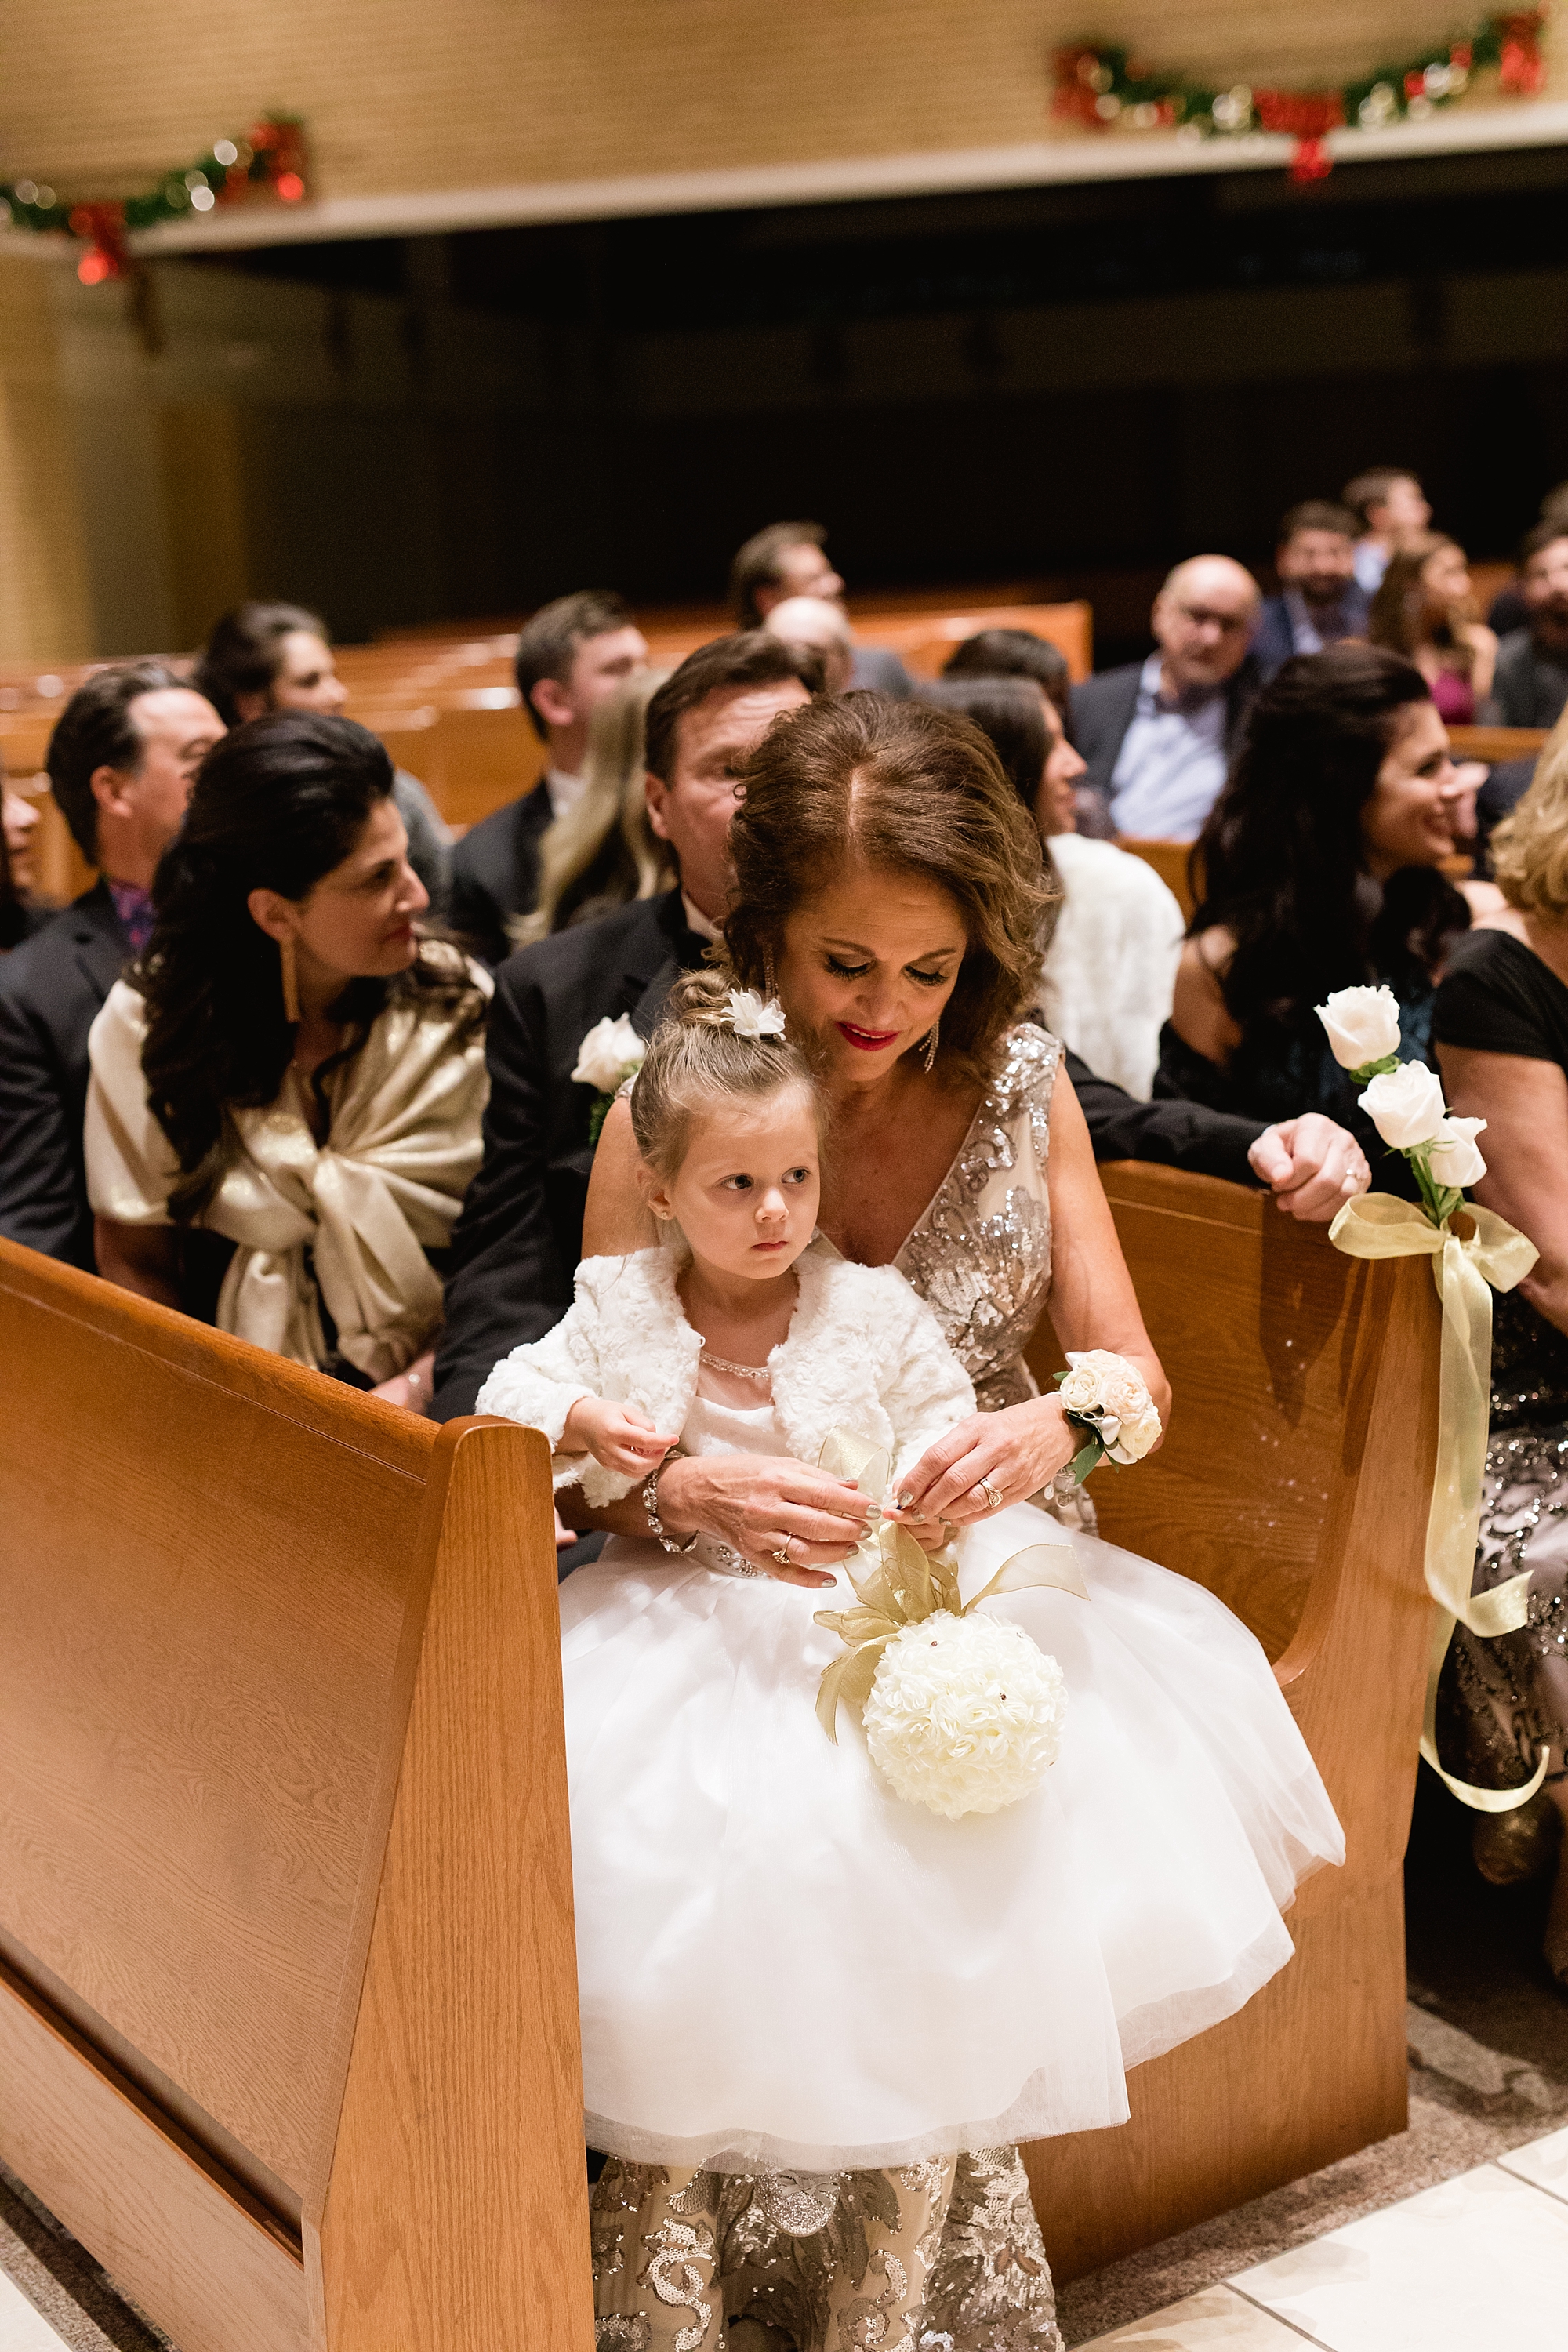 A glamorous gold and blush black tie New Year’s Eve wedding at Cherry Creek by Breanne Rochelle Photography.